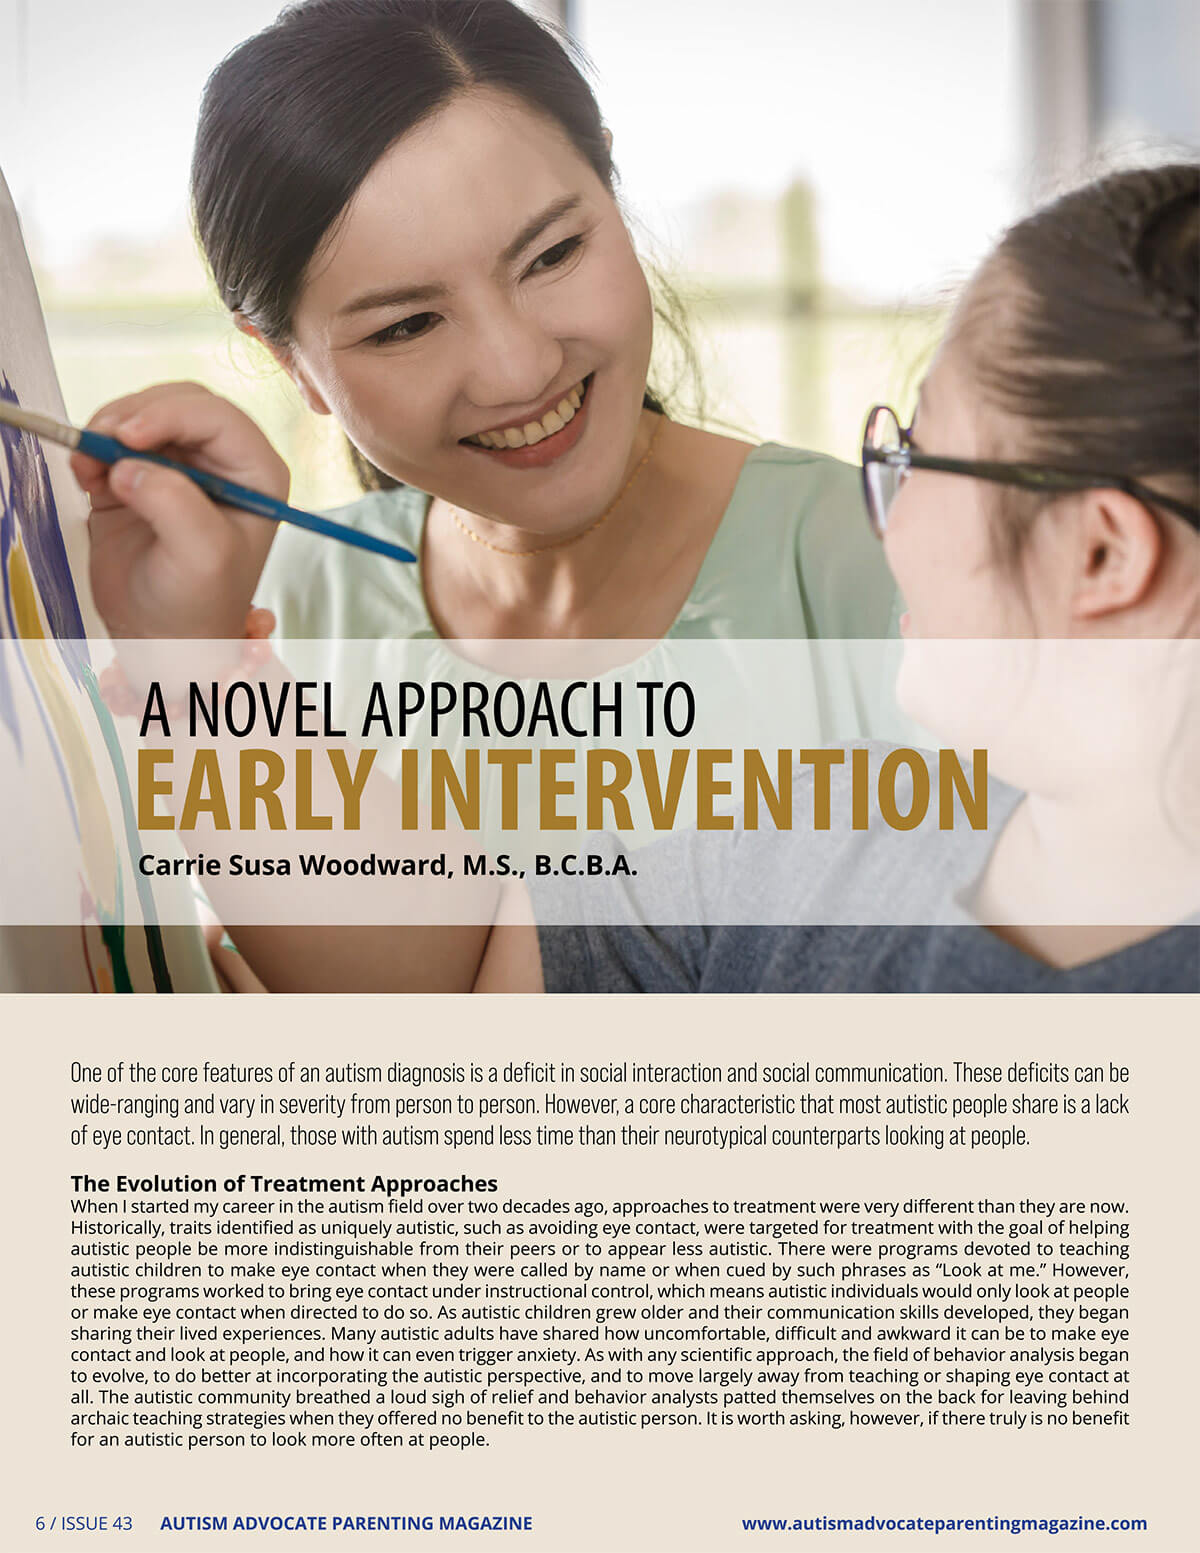 Cover page of an article titled 'A Novel Approach to Early Intervention' featuring an adult smiling while painting with a child, authored by Carrie Susa Woodward, M.S., B.C.B.A., discussing social interaction deficits in autism and evolving treatment approaches. Published in Autism Advocate Parenting Magazine, Issue 43.